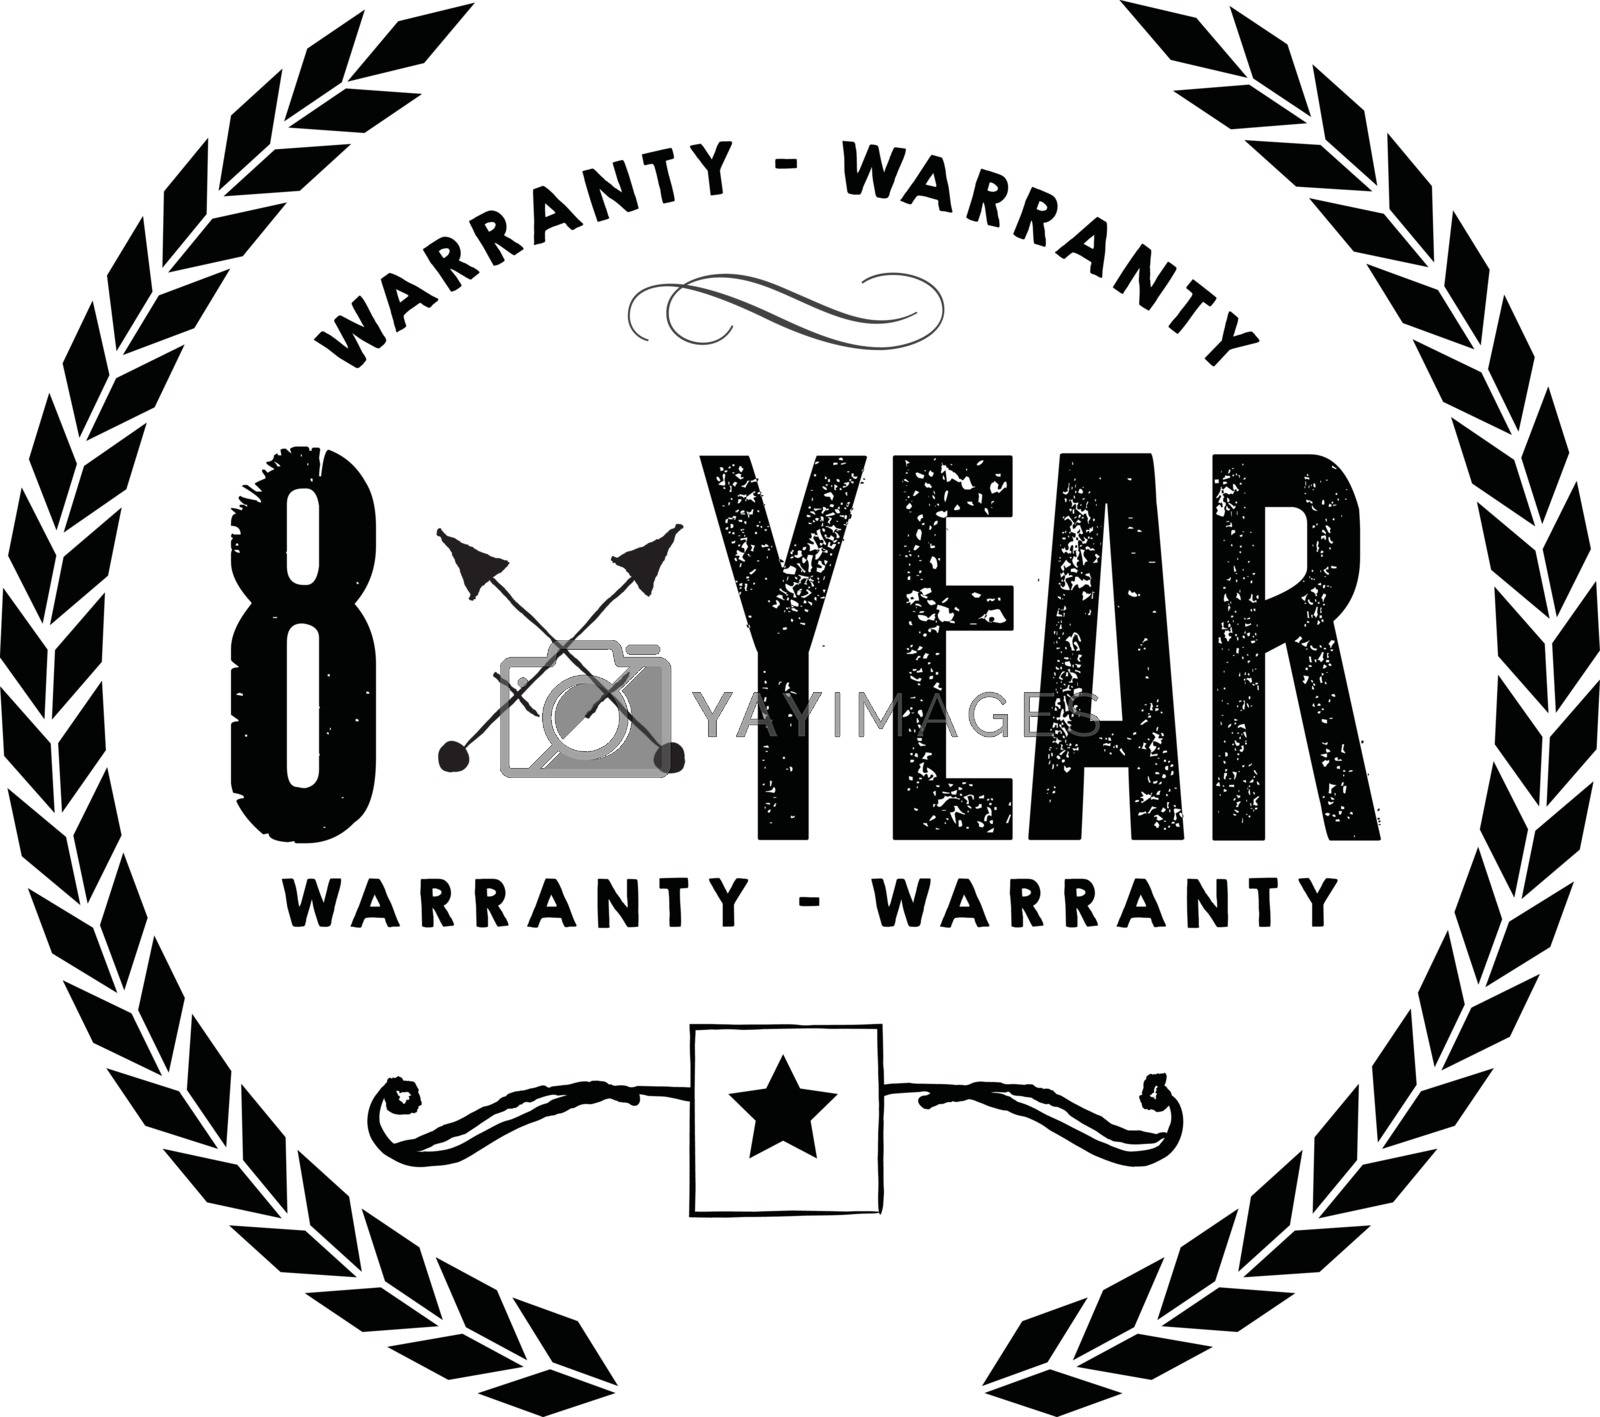 Royalty free image of 8 years warranty illustration by teguh_jam@yahoo.com